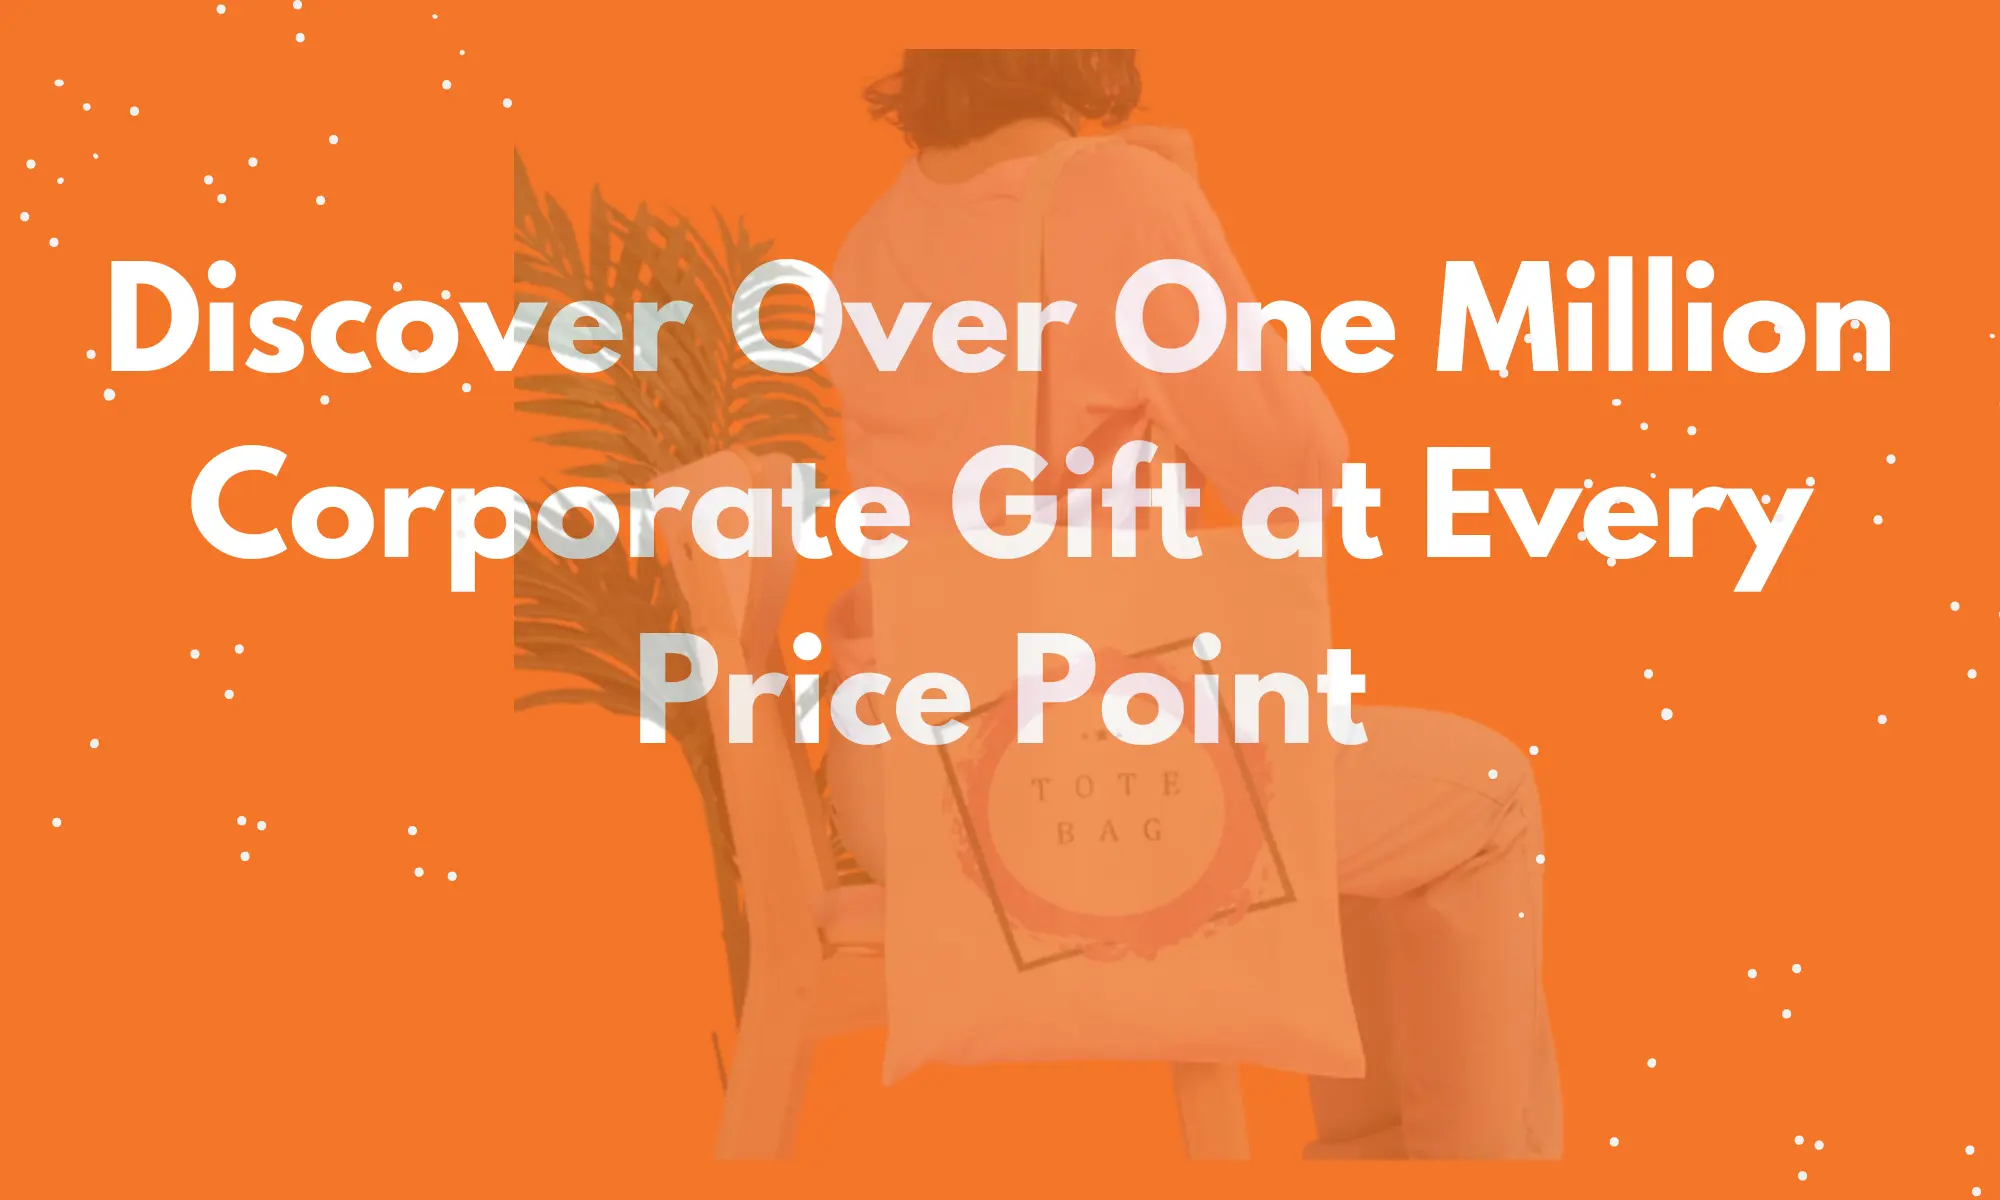 Discover Over One Million Corporate Gifts at Every Price Point